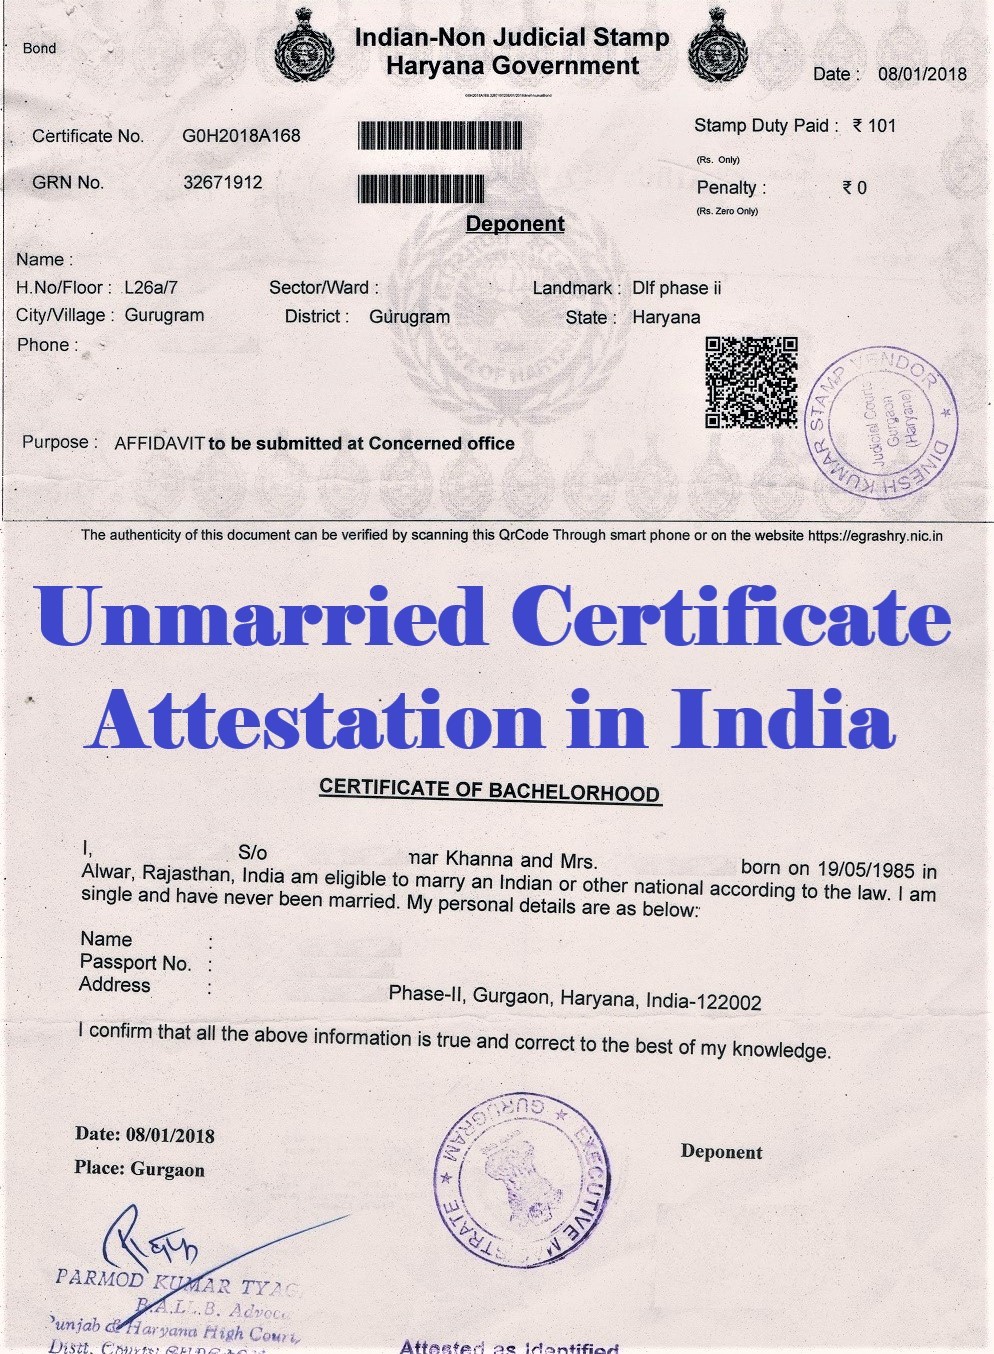 Unmarried Certificate Attestation from Antigua and Barbuda Embassy